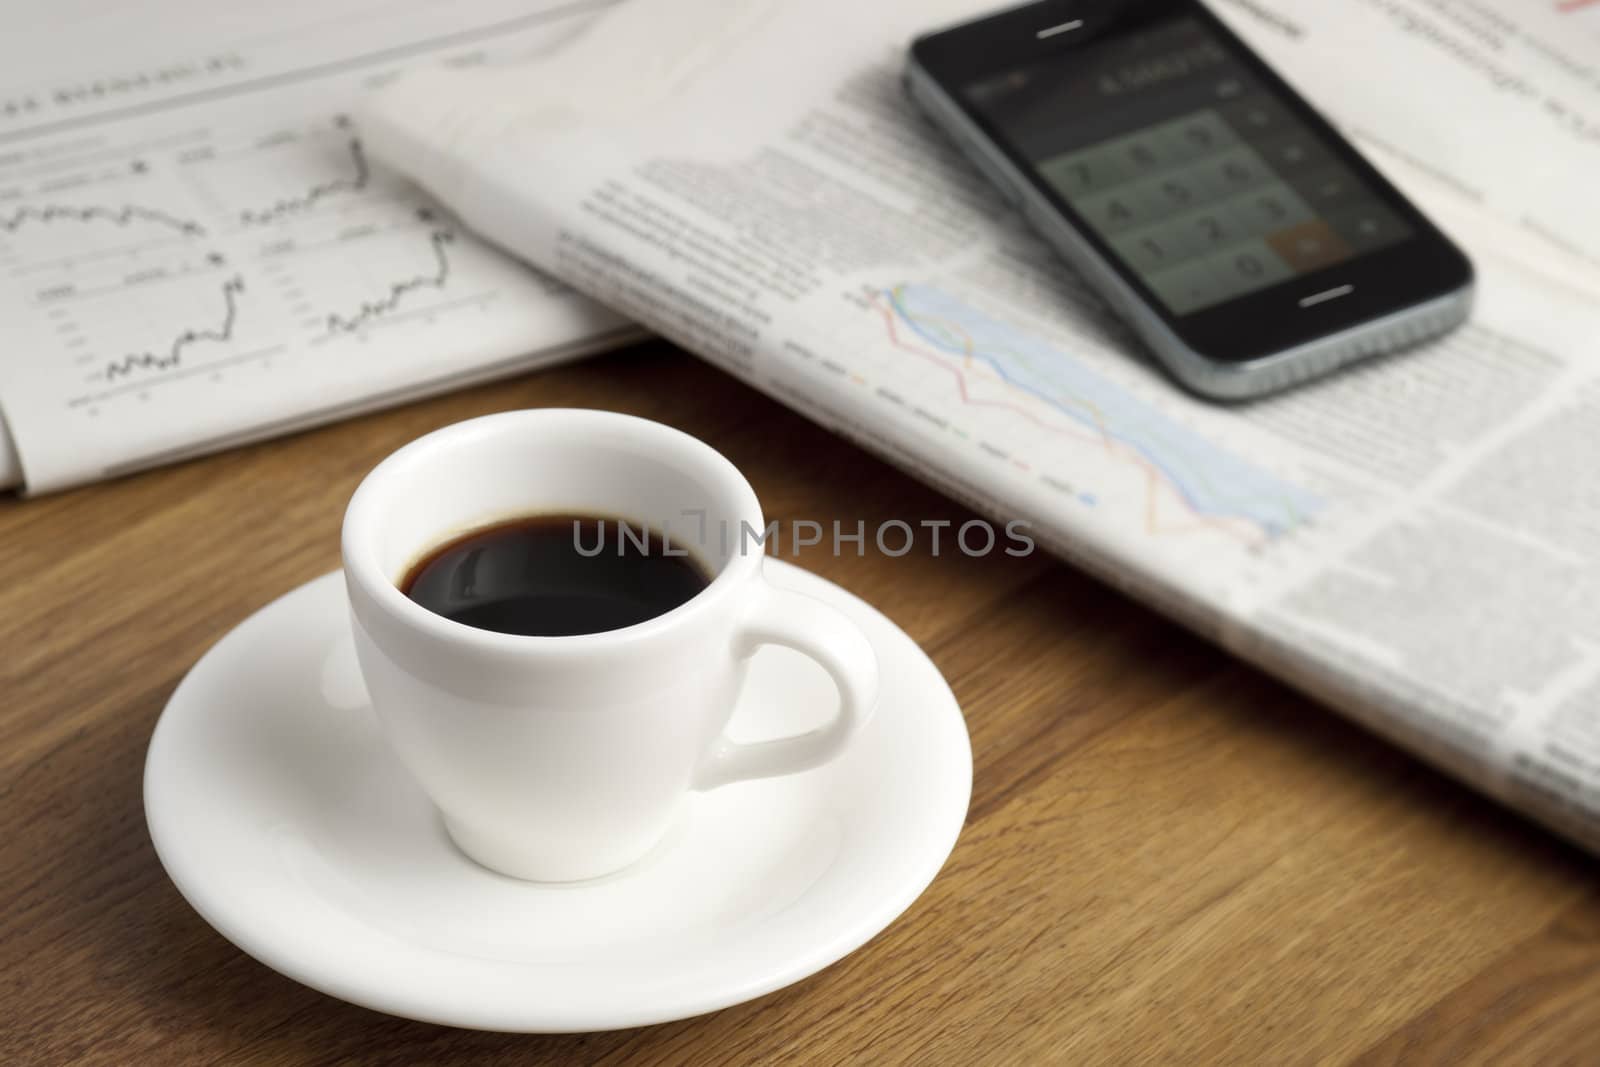 Coffe cup, smartphone and newspapers. by Pietus